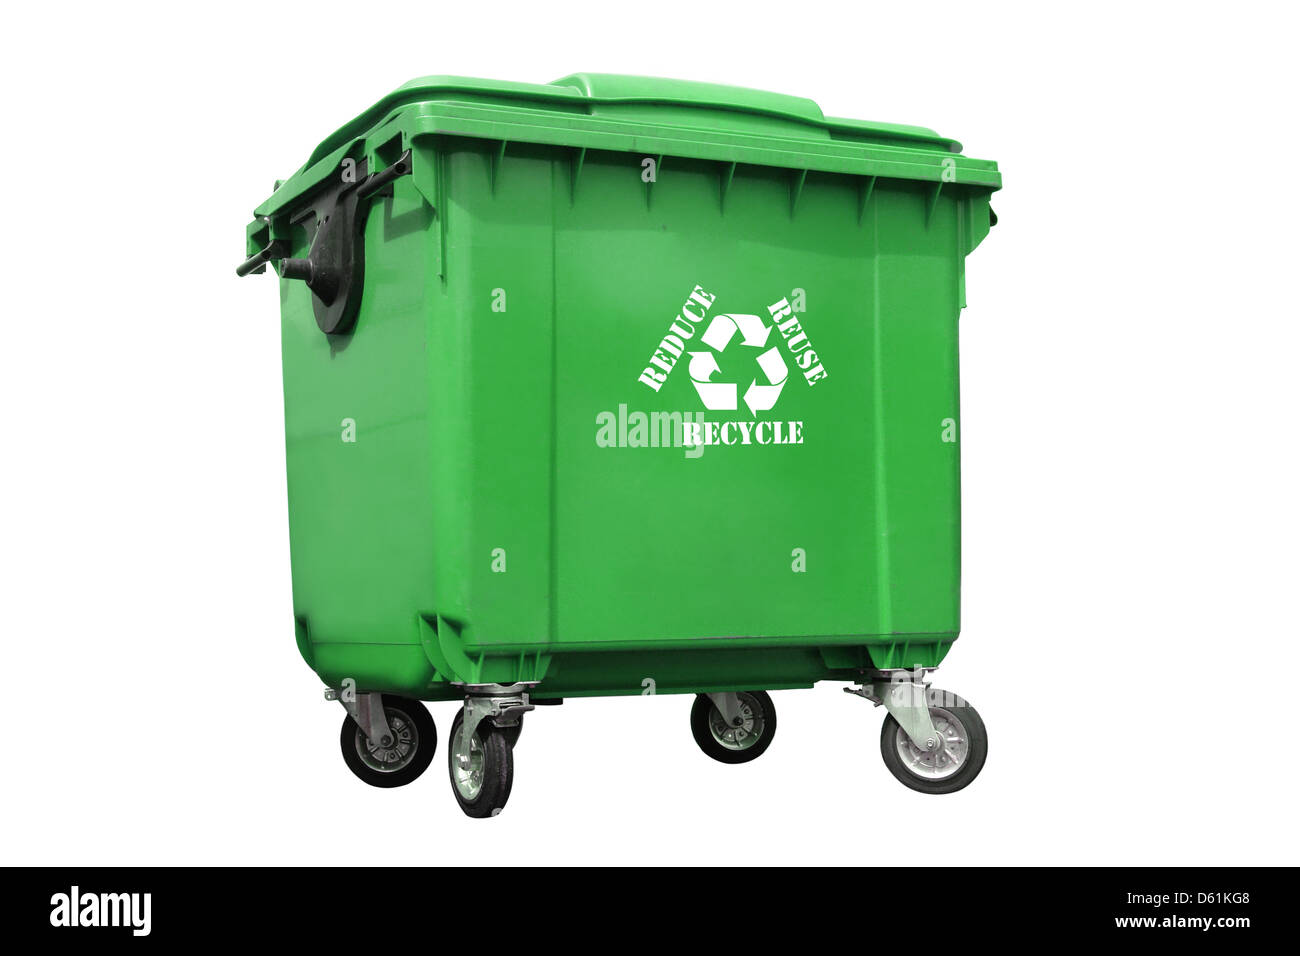 Green plastic trash container with white recycle symbol and reduce-reuse-recycle text - over white background Stock Photo